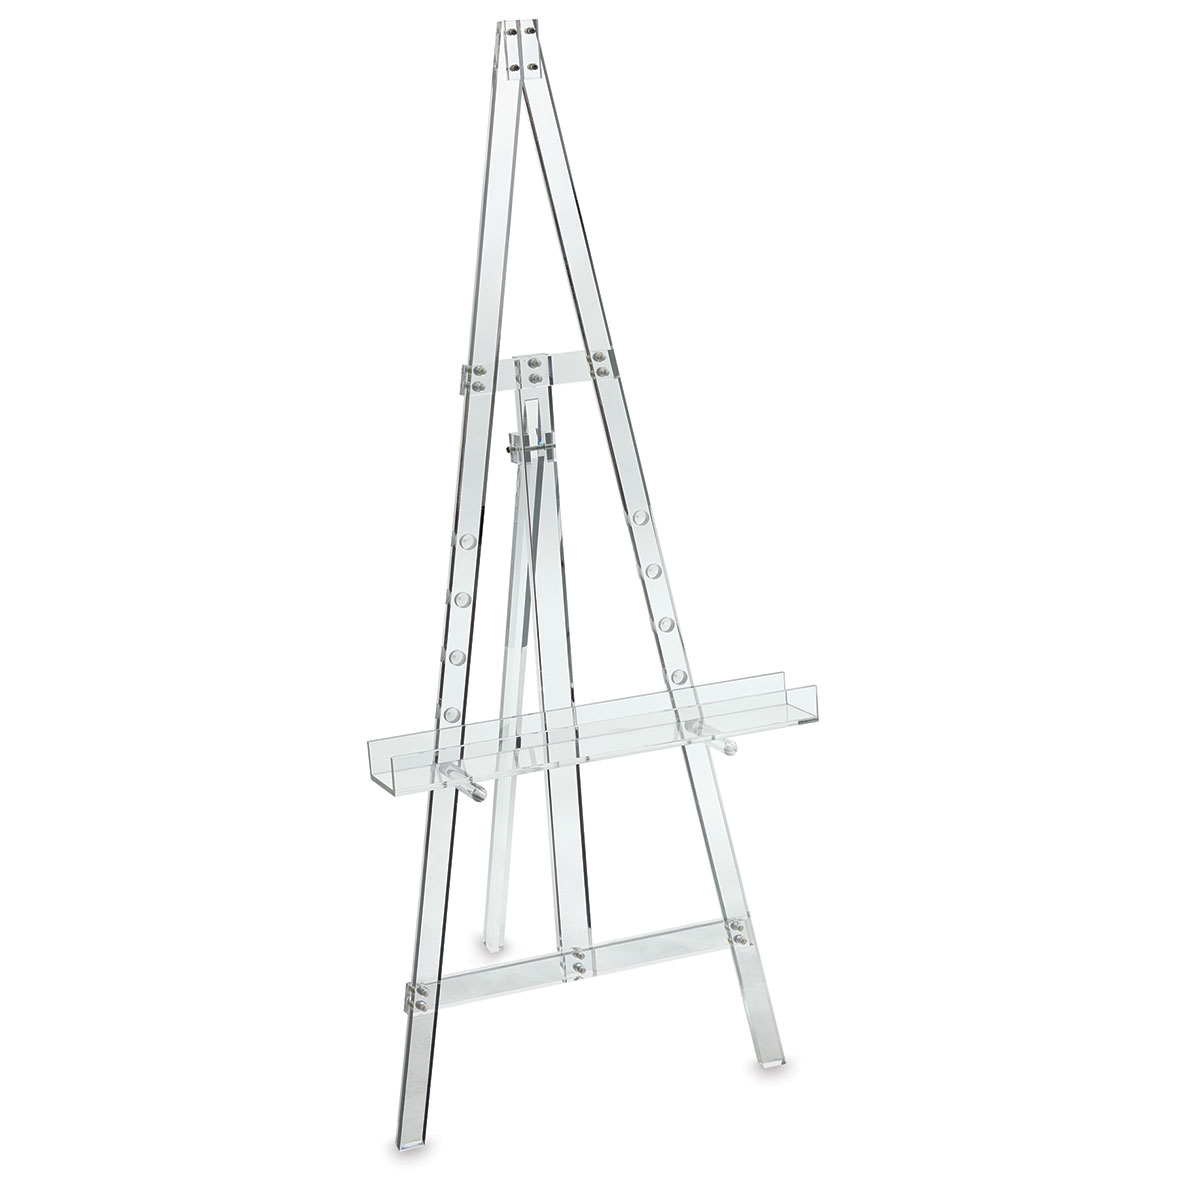 Holder PICK SIZE QUANTITY ~#Economy line: Our Best Value Display Stand Easel 